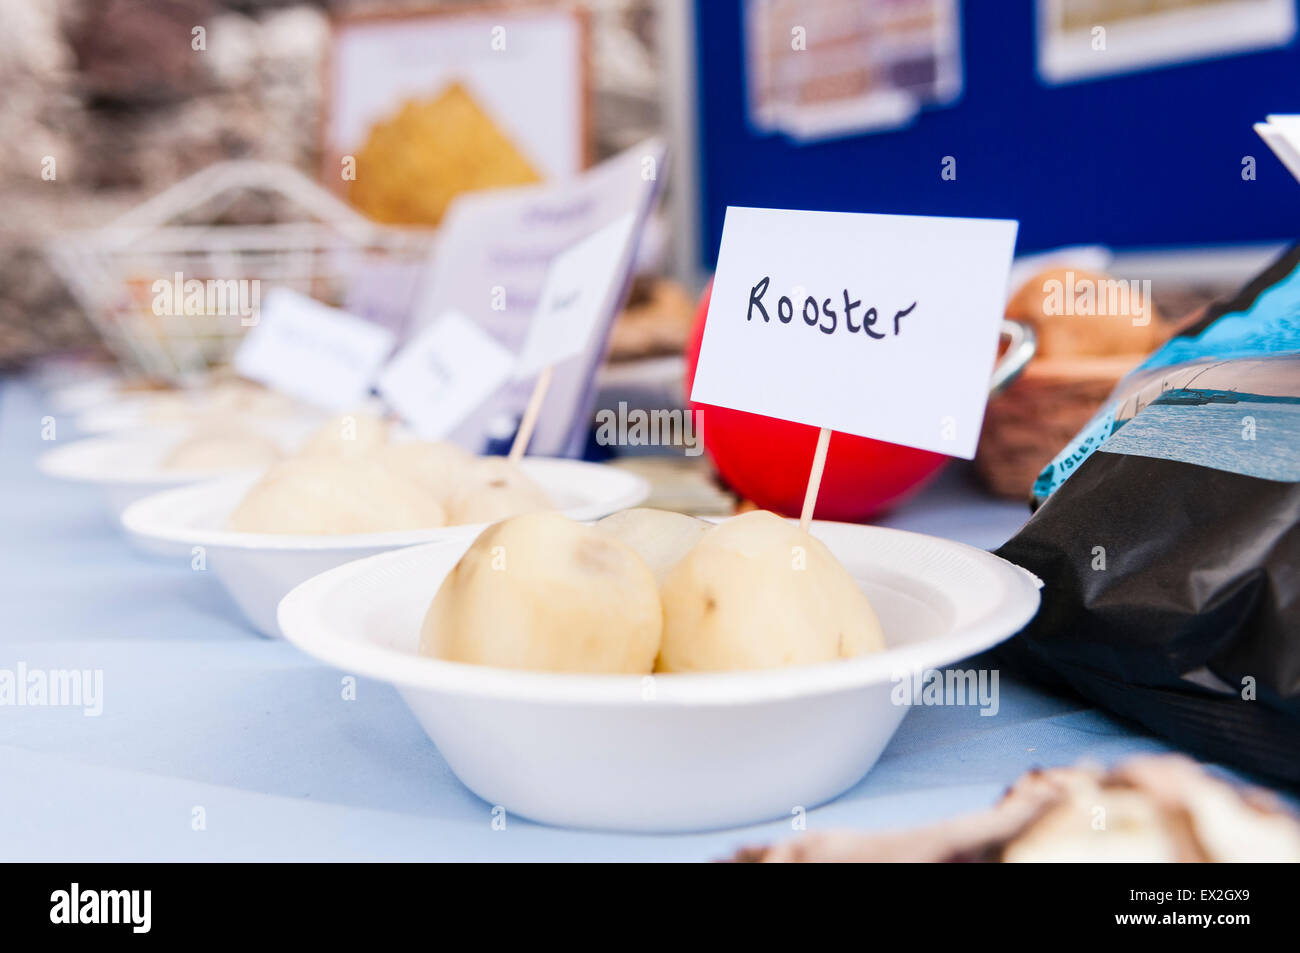 Rooster potatoes on display at a food fair. Stock Photo